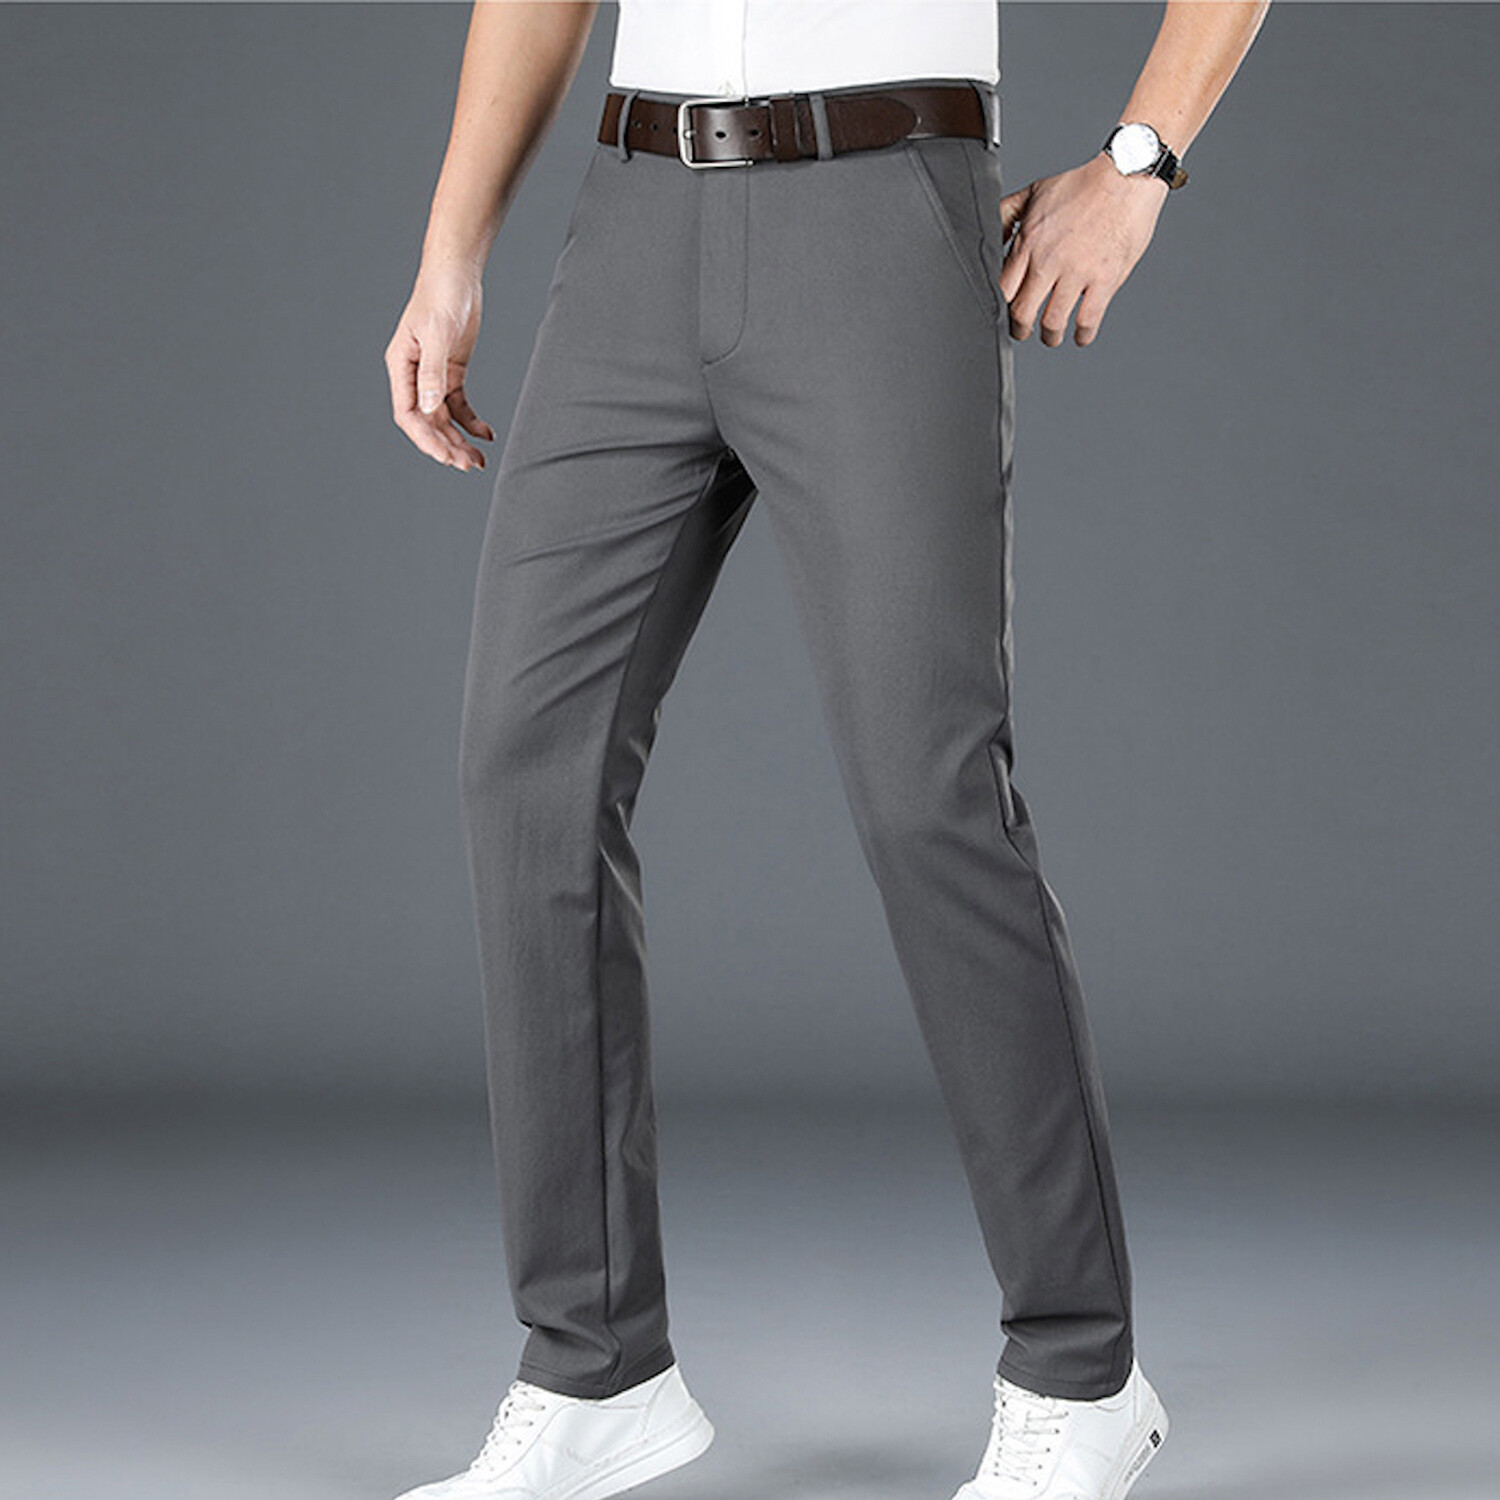 Slit Pocket Chino Pants // Gray (33) - The Celino Chino - Touch of Modern